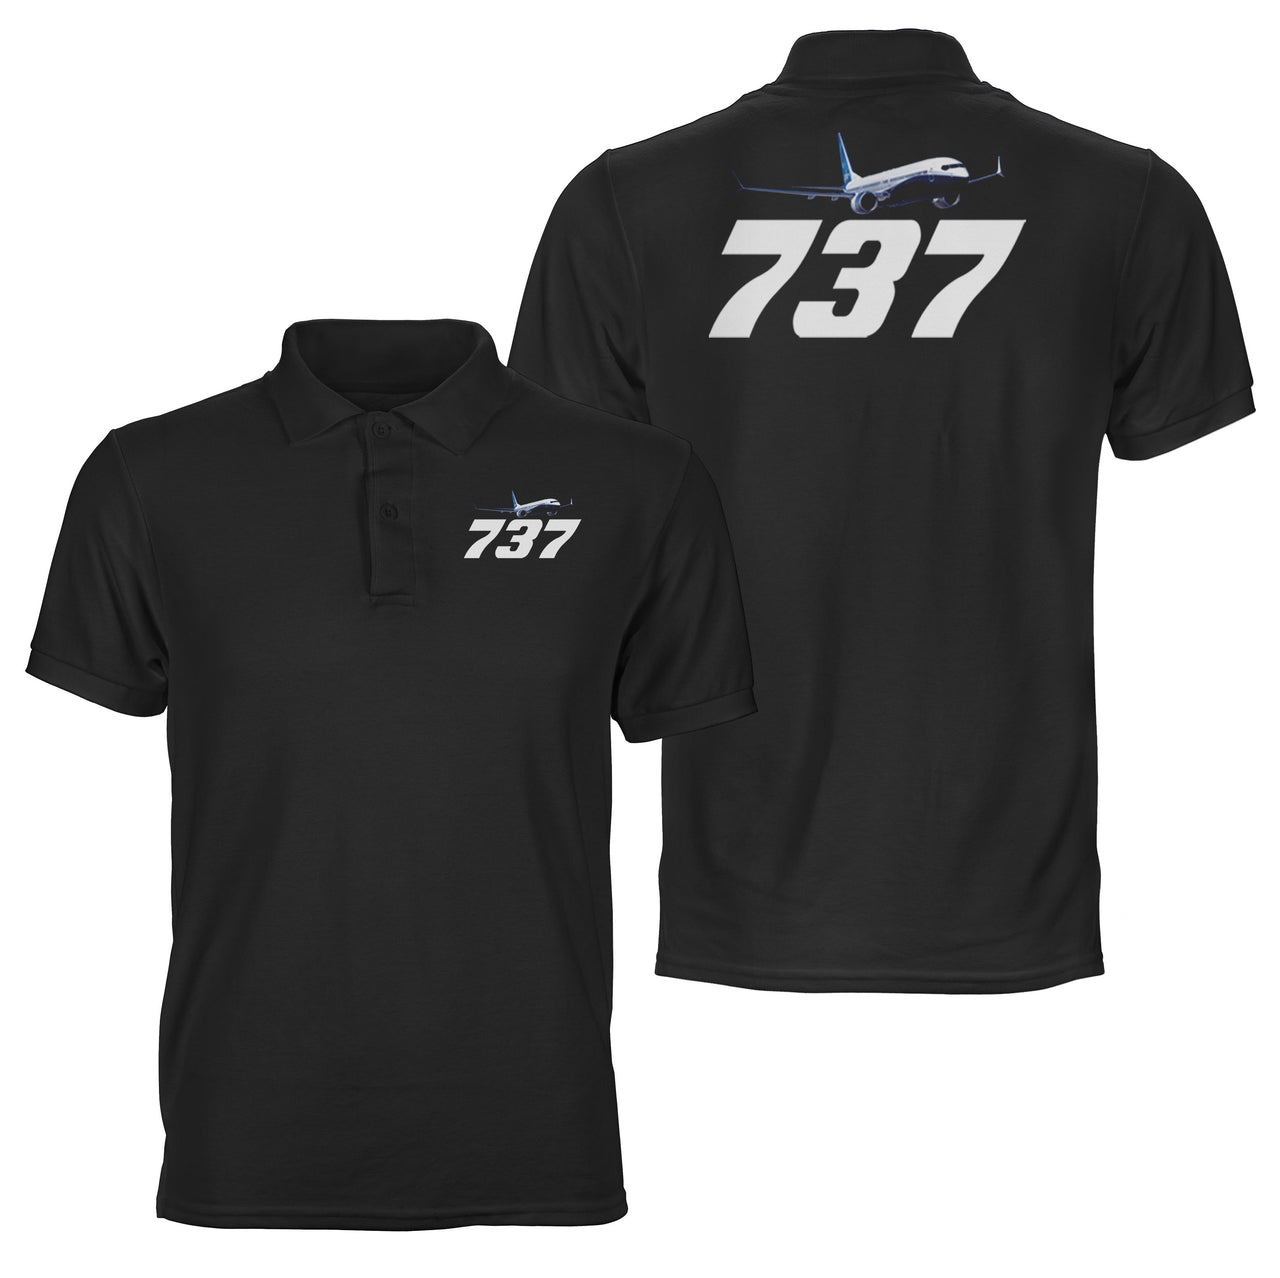 Super Boeing 737-800 Designed Double Side Polo T-Shirts